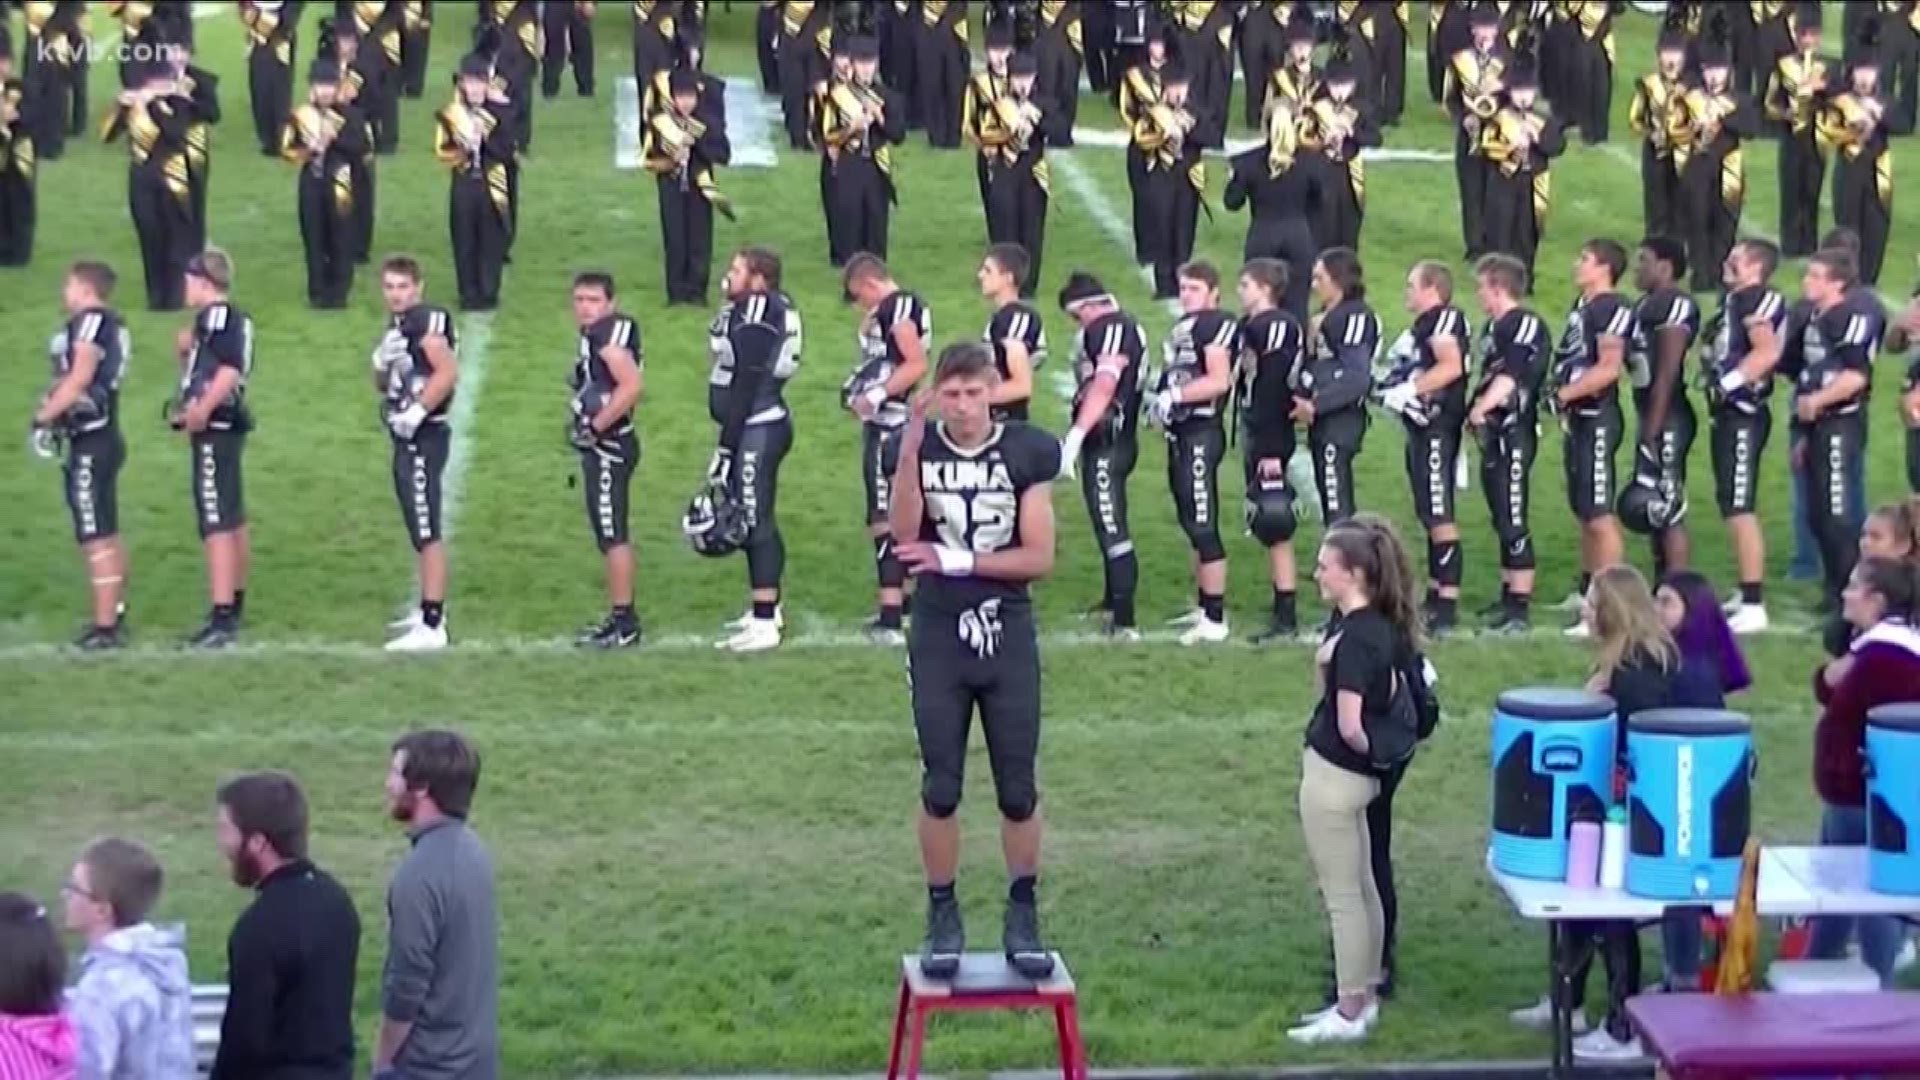 Kuna High Senior Jonathan Edwards had no idea his American Sign Language rendition of the anthem would inspire millions of people around the world.